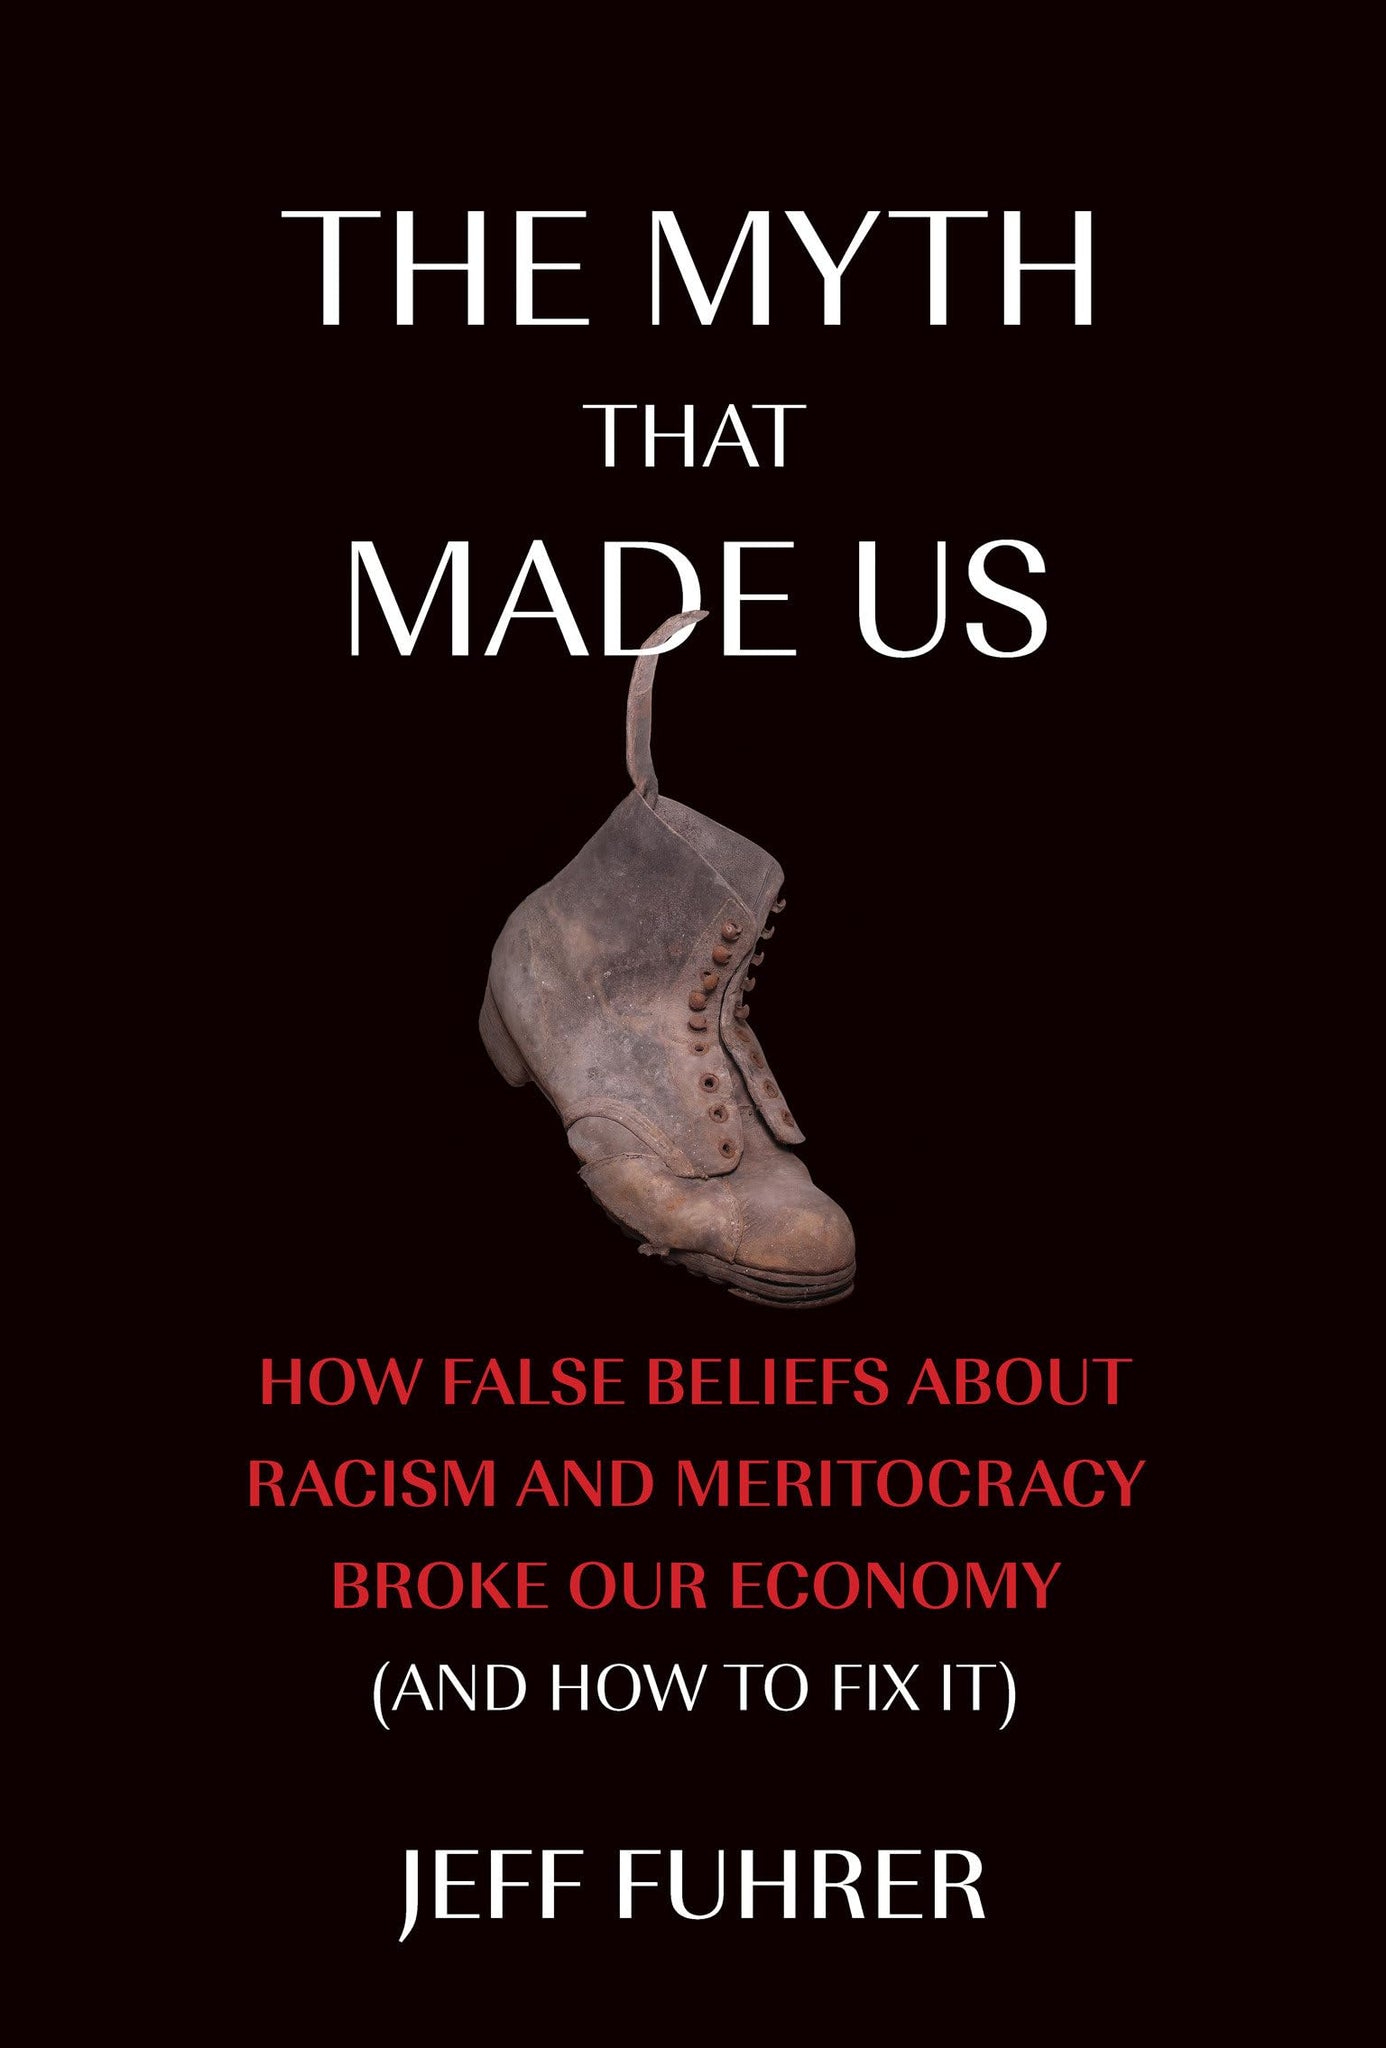 The Myth That Made Us: How False Beliefs about Racism and Meritocracy Broke Our Economy (and How to Fix It) (Hardcover)